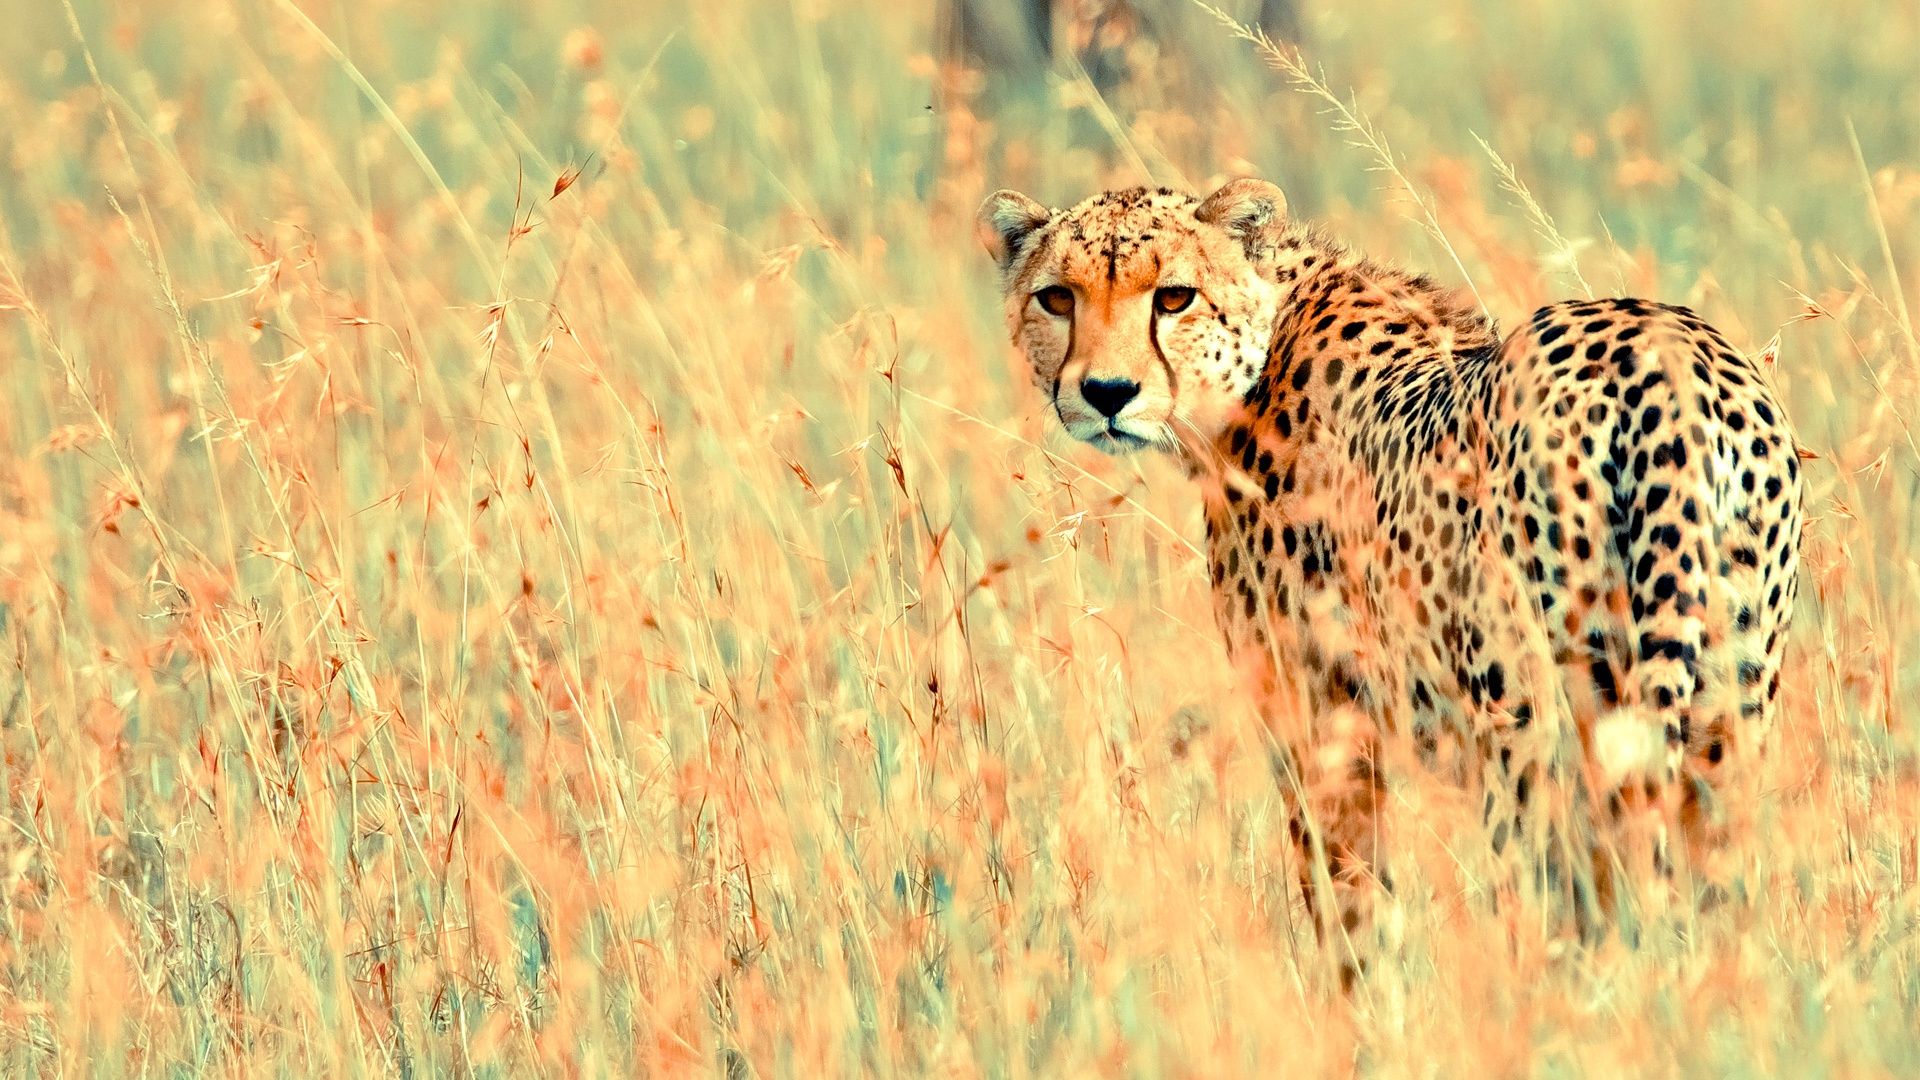 HD wallpaper, Pictures, Cheetah, African